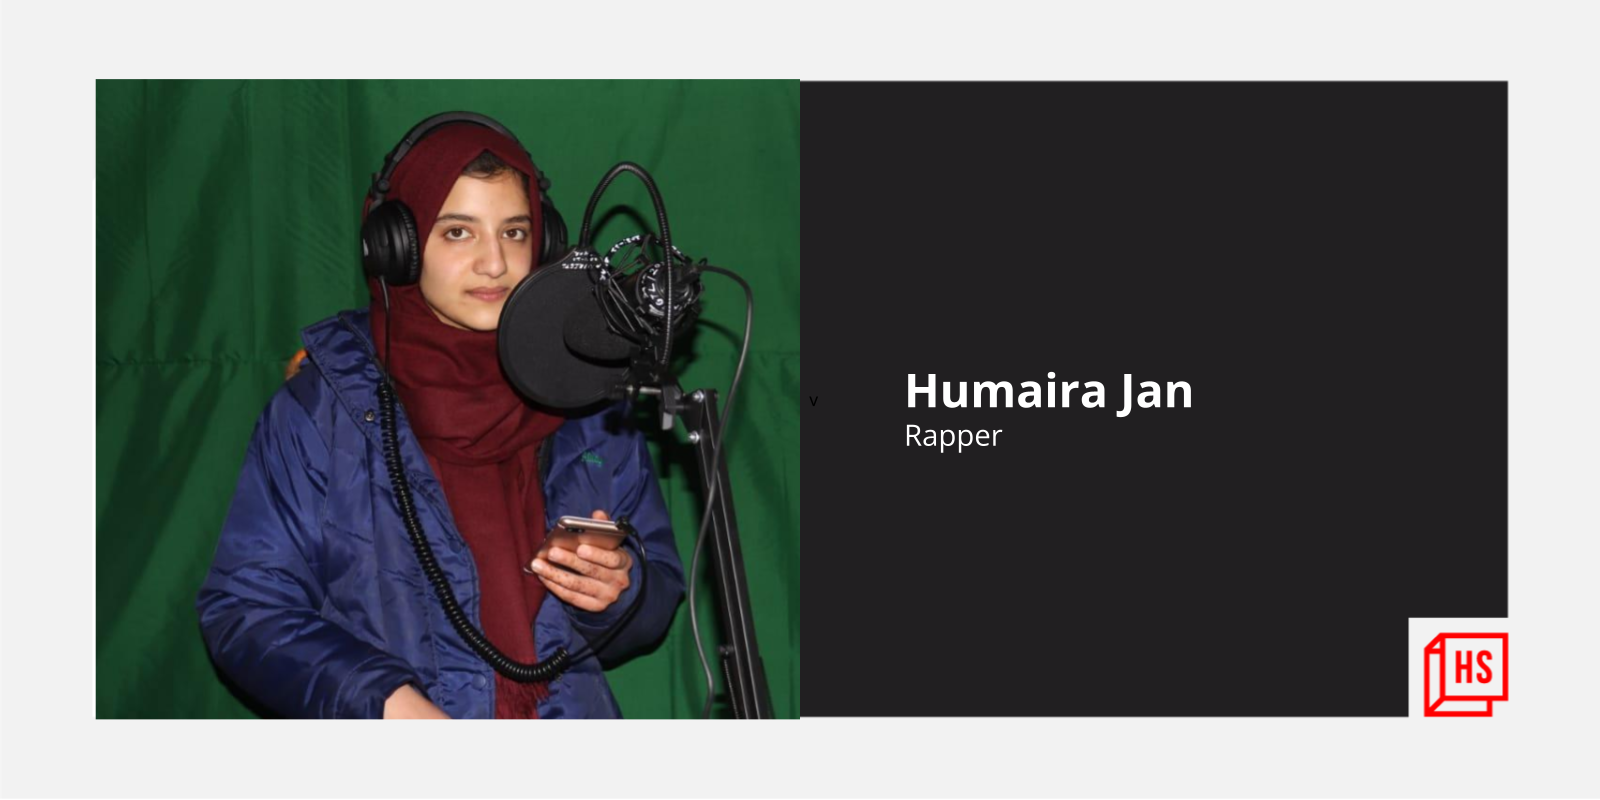 Meet Humaira Jan, a 13-year-old rapper from Kashmir who wants to change the way the world sees women

